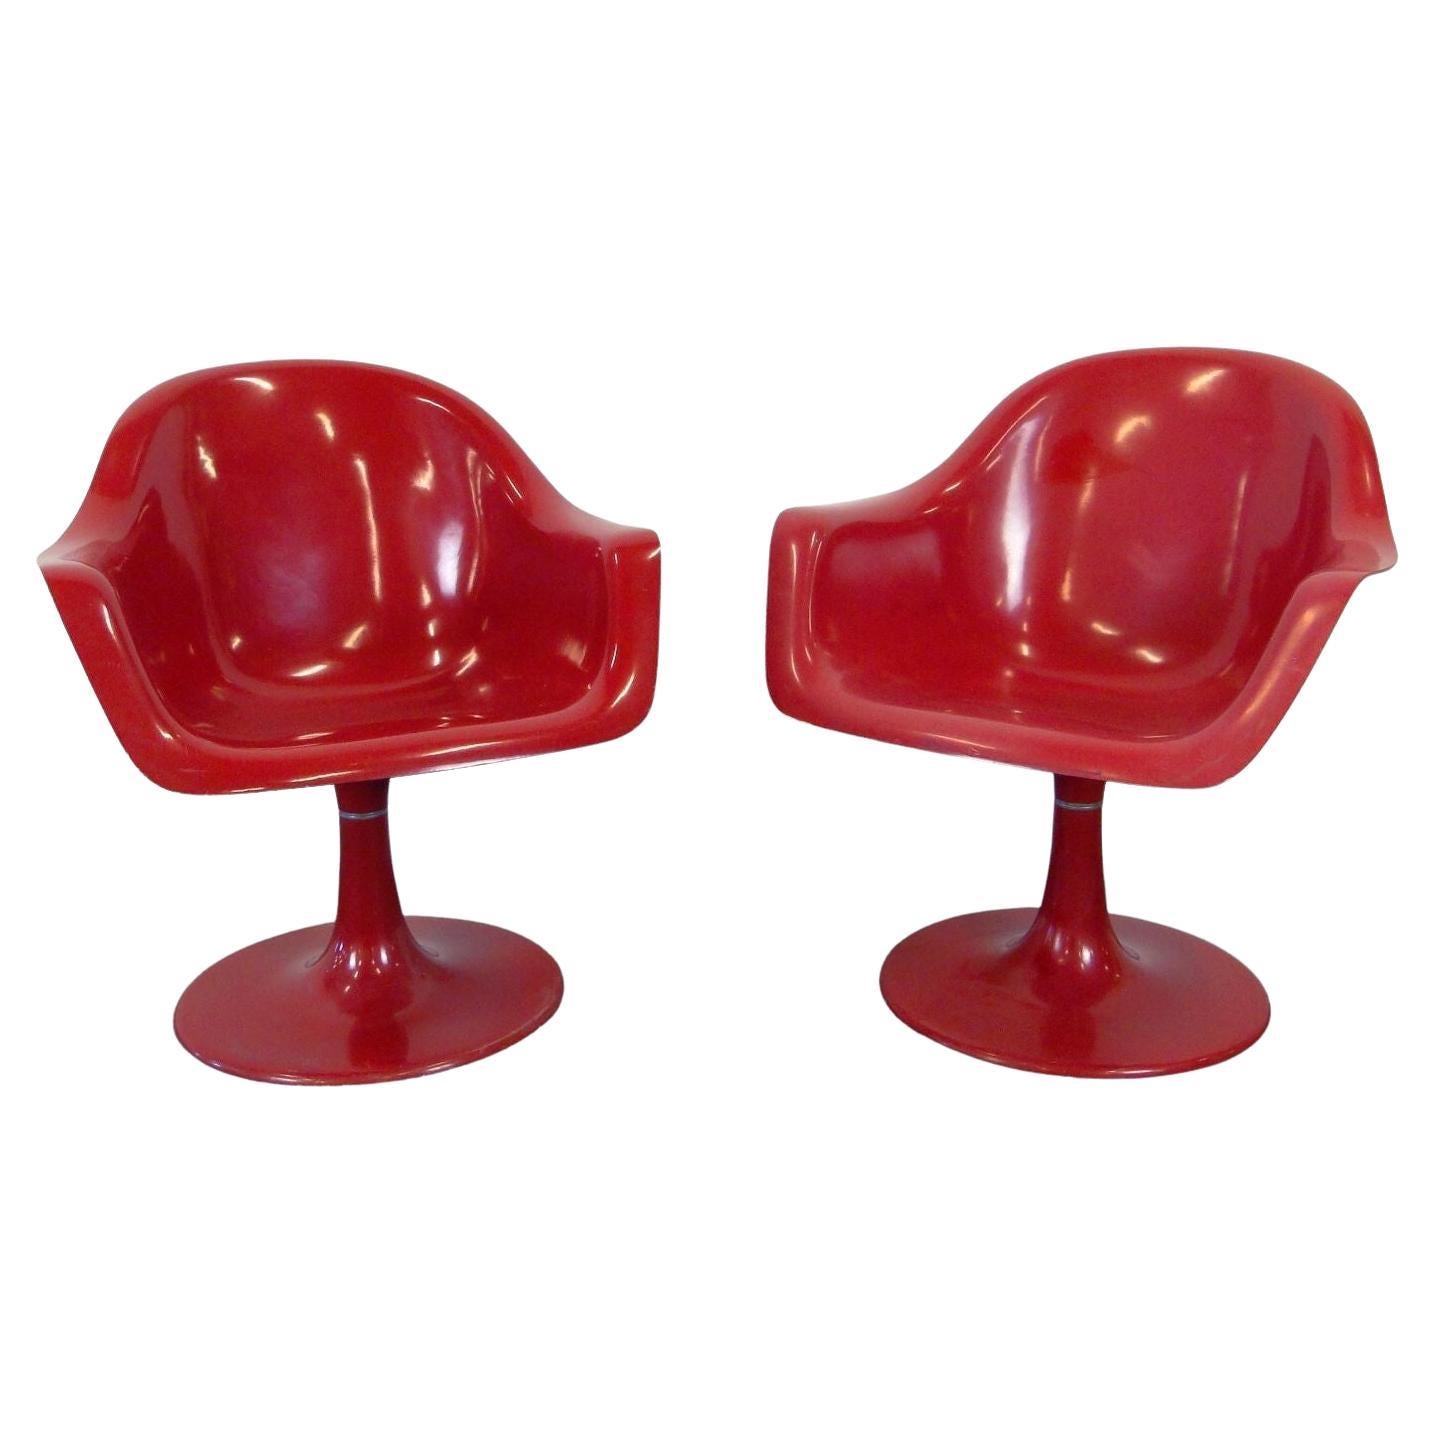 Space Age Red "Tulip" Swivel Chairs by Péter Ghyczy, Germany 1970s For Sale